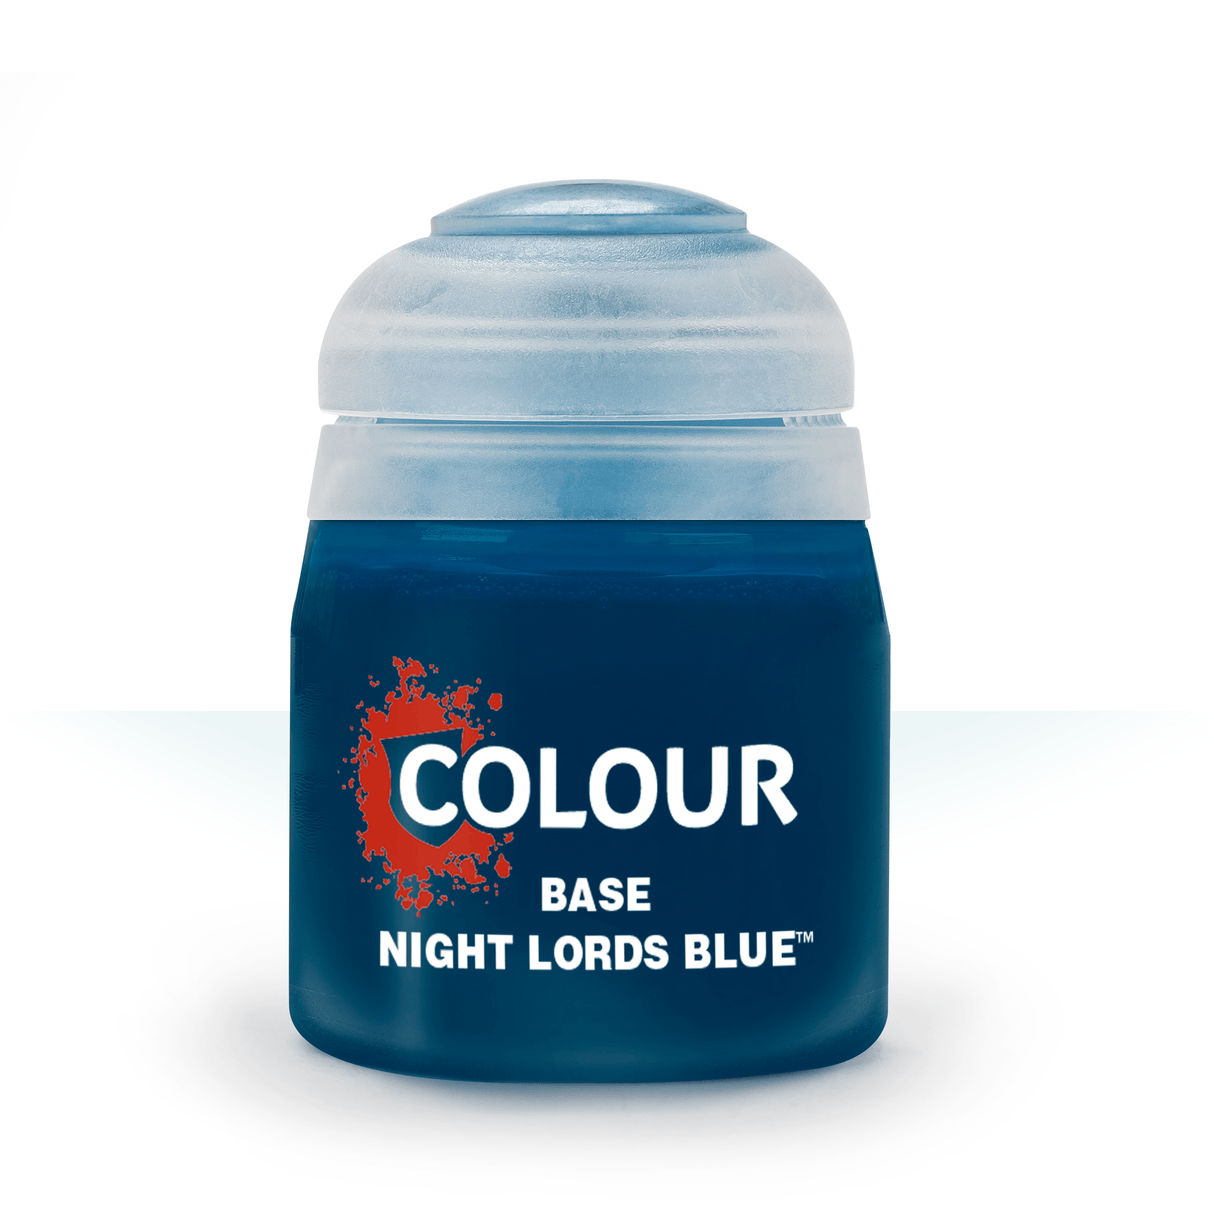 Air: Night Lords Blue